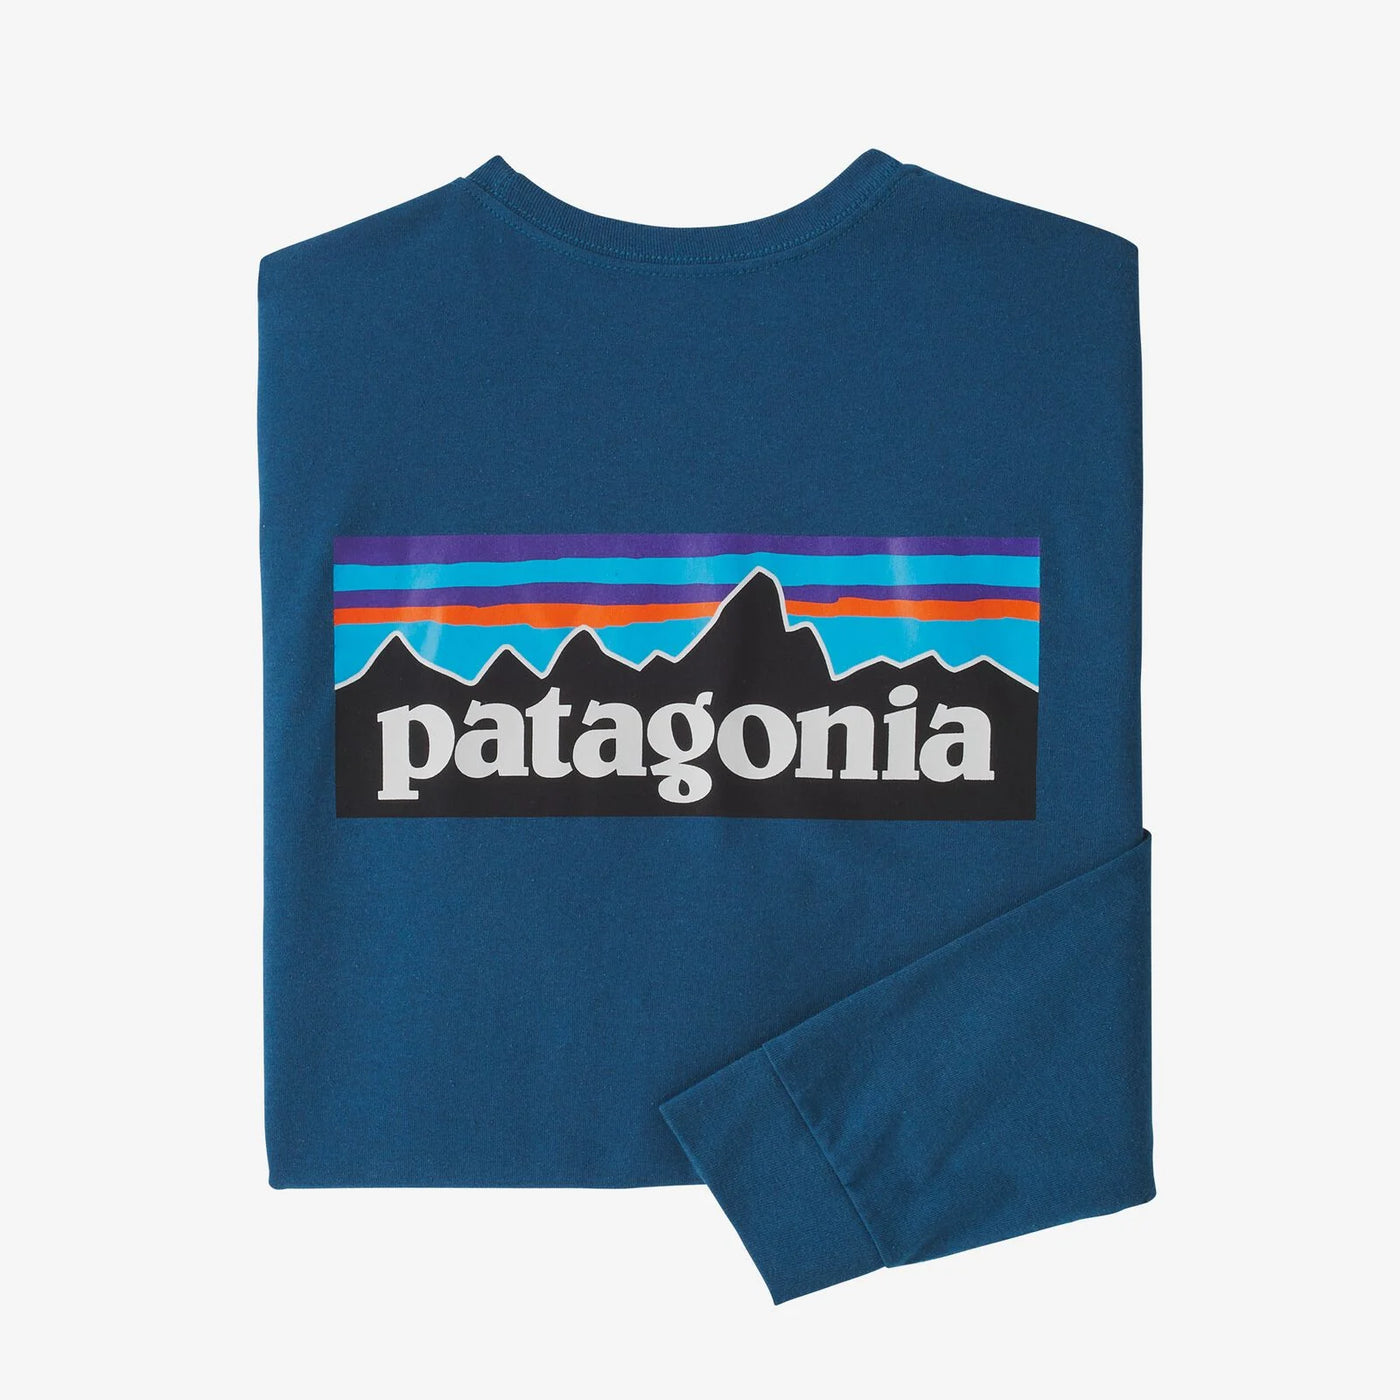 Patagonia Men's Long Sleeve P-6 Logo Responsibili-Tee T-Shirt-Men's Clothing-WAVE BLUE-S-Kevin's Fine Outdoor Gear & Apparel